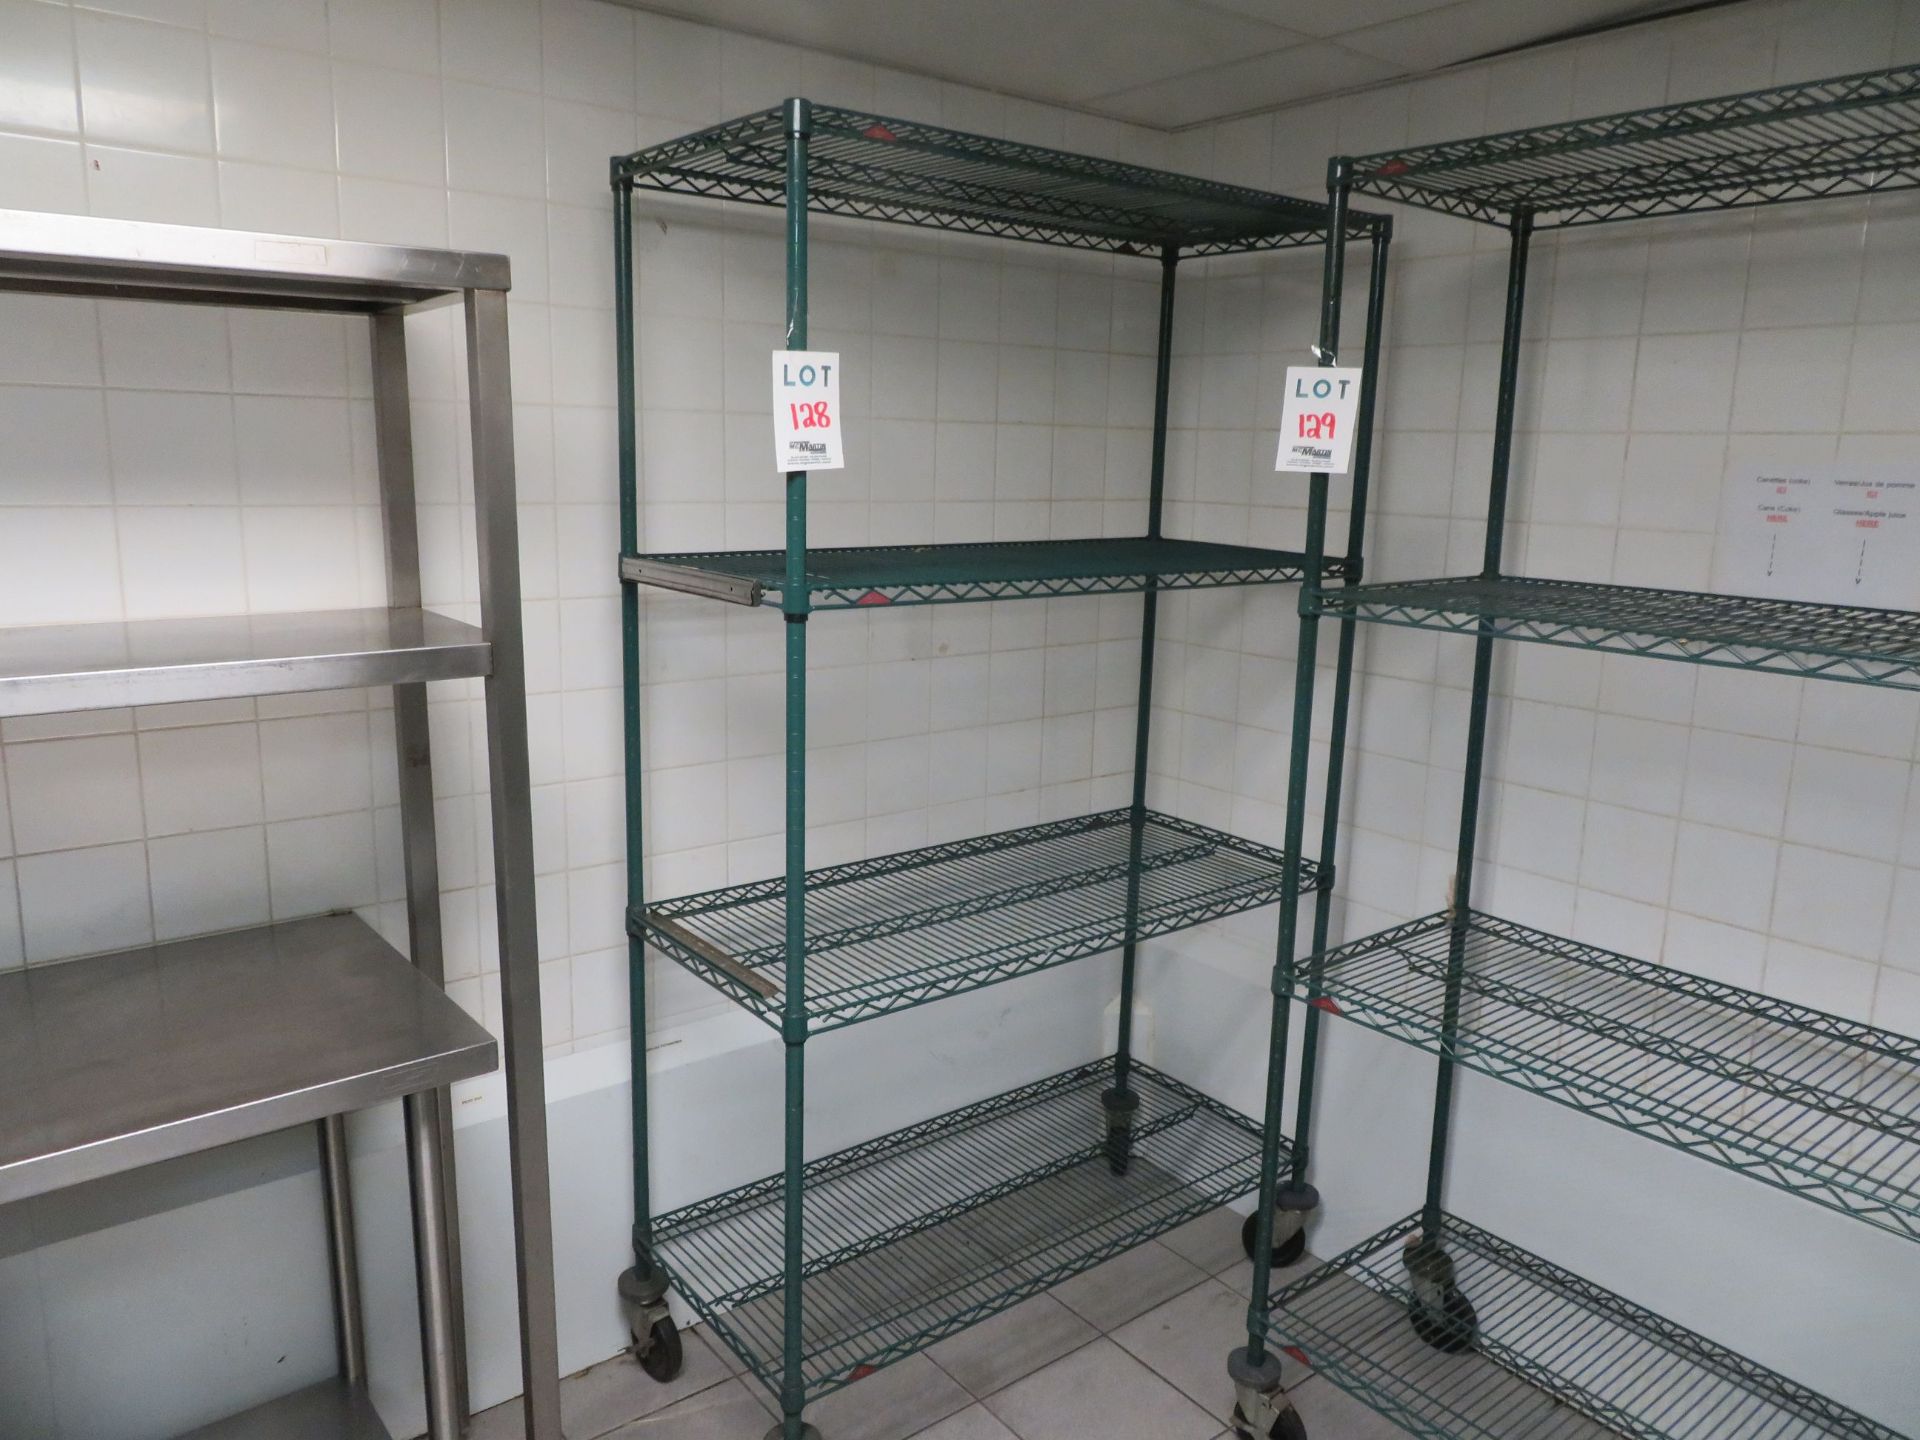 Stainless steel shelving on wheels approx. 48"w x 21"d x 80"h